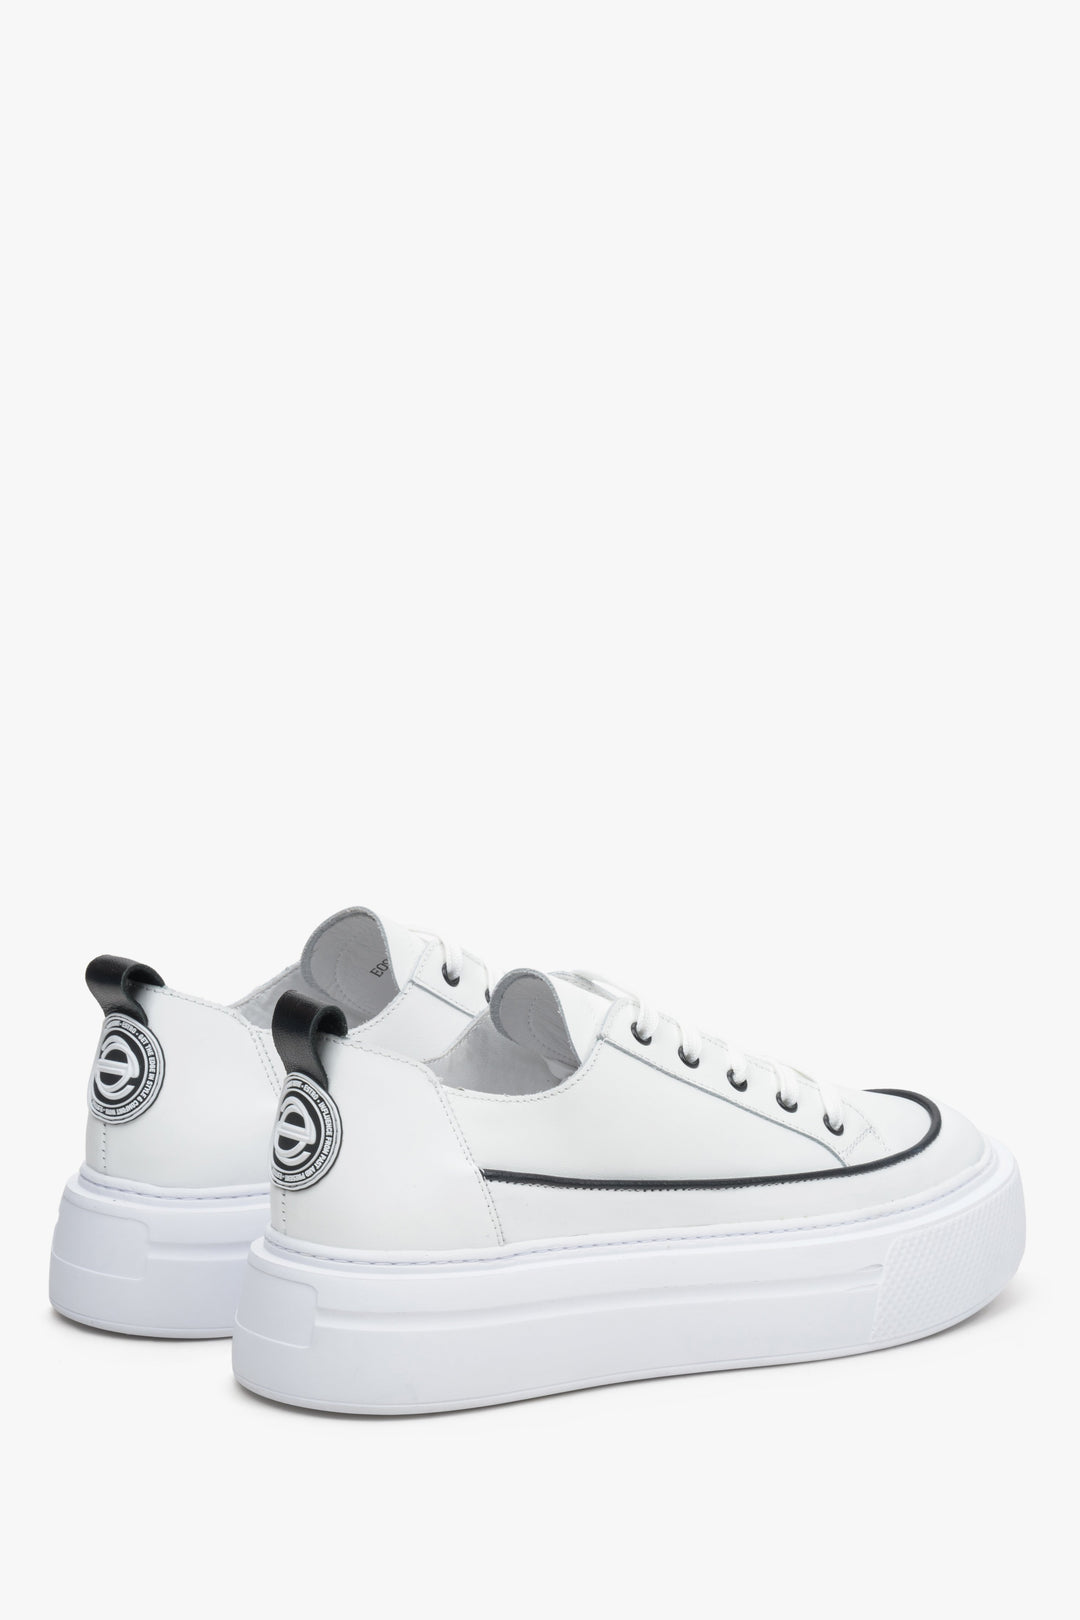 Women's low top leather sneakers Estro in white - a close-up on shoe line.